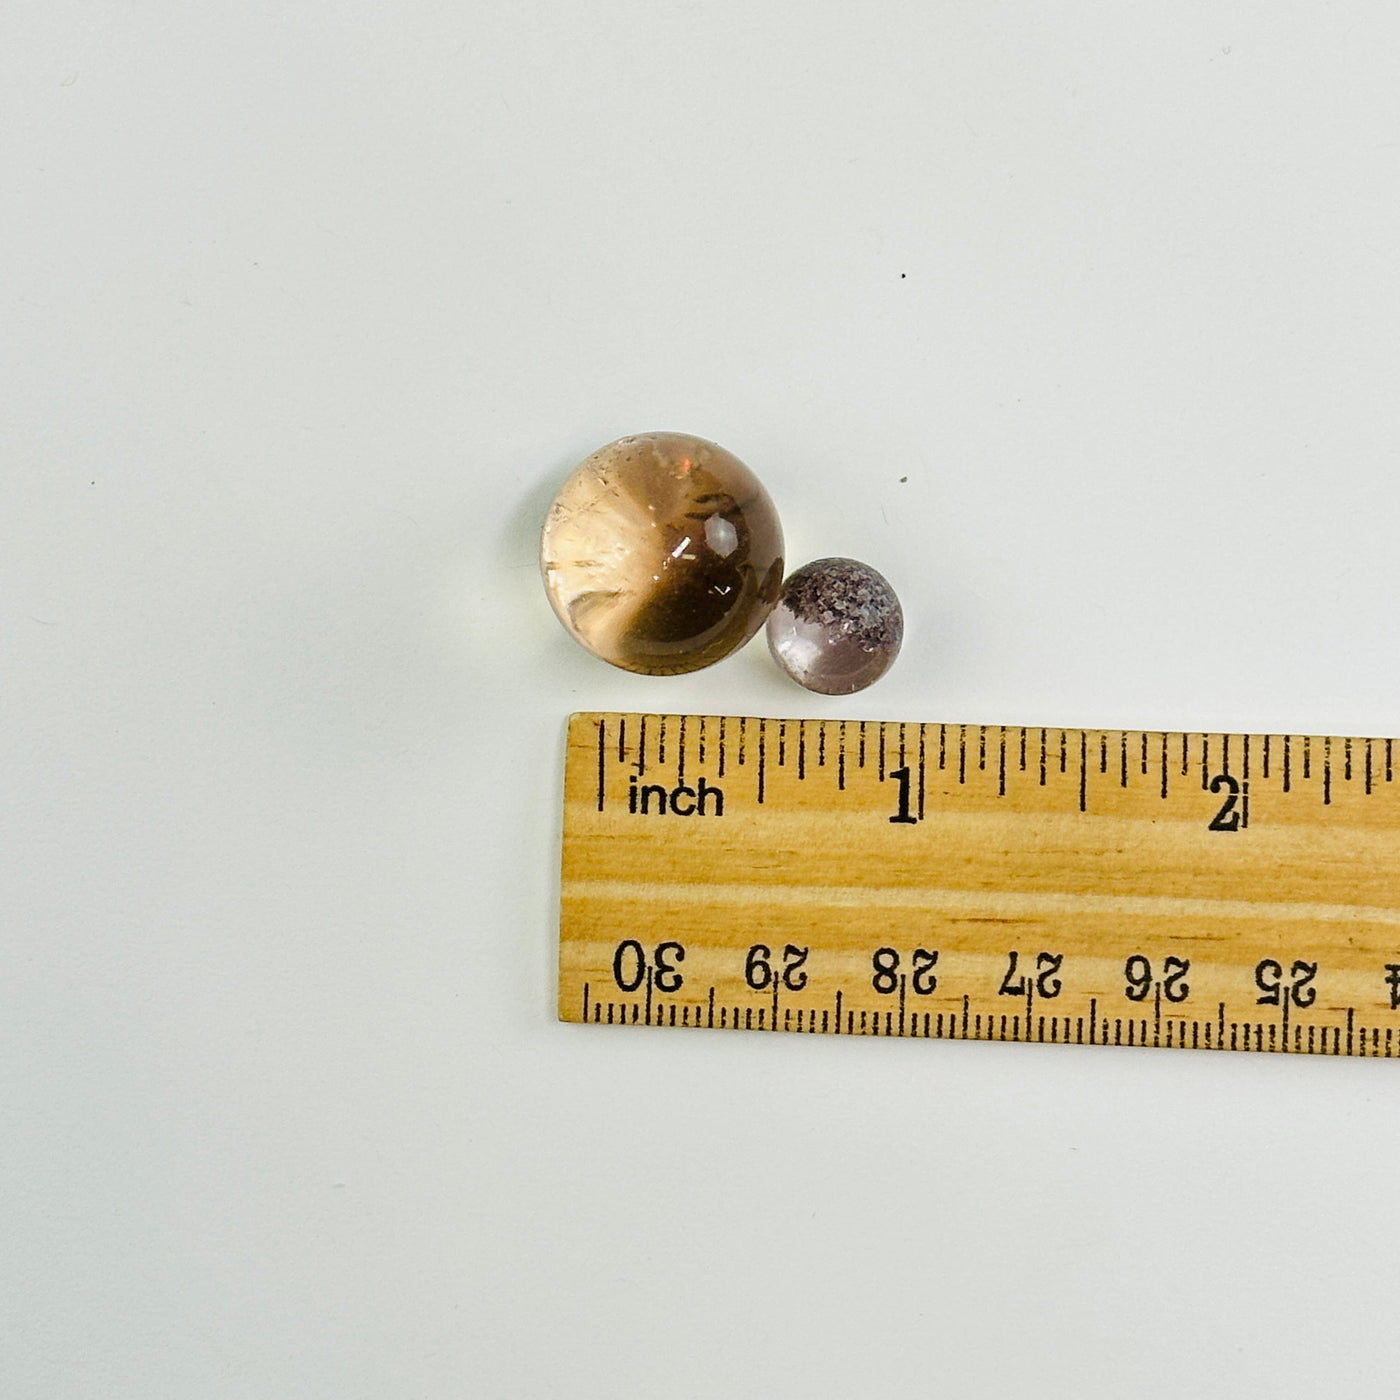 lodalite spheres next to a ruler for size reference